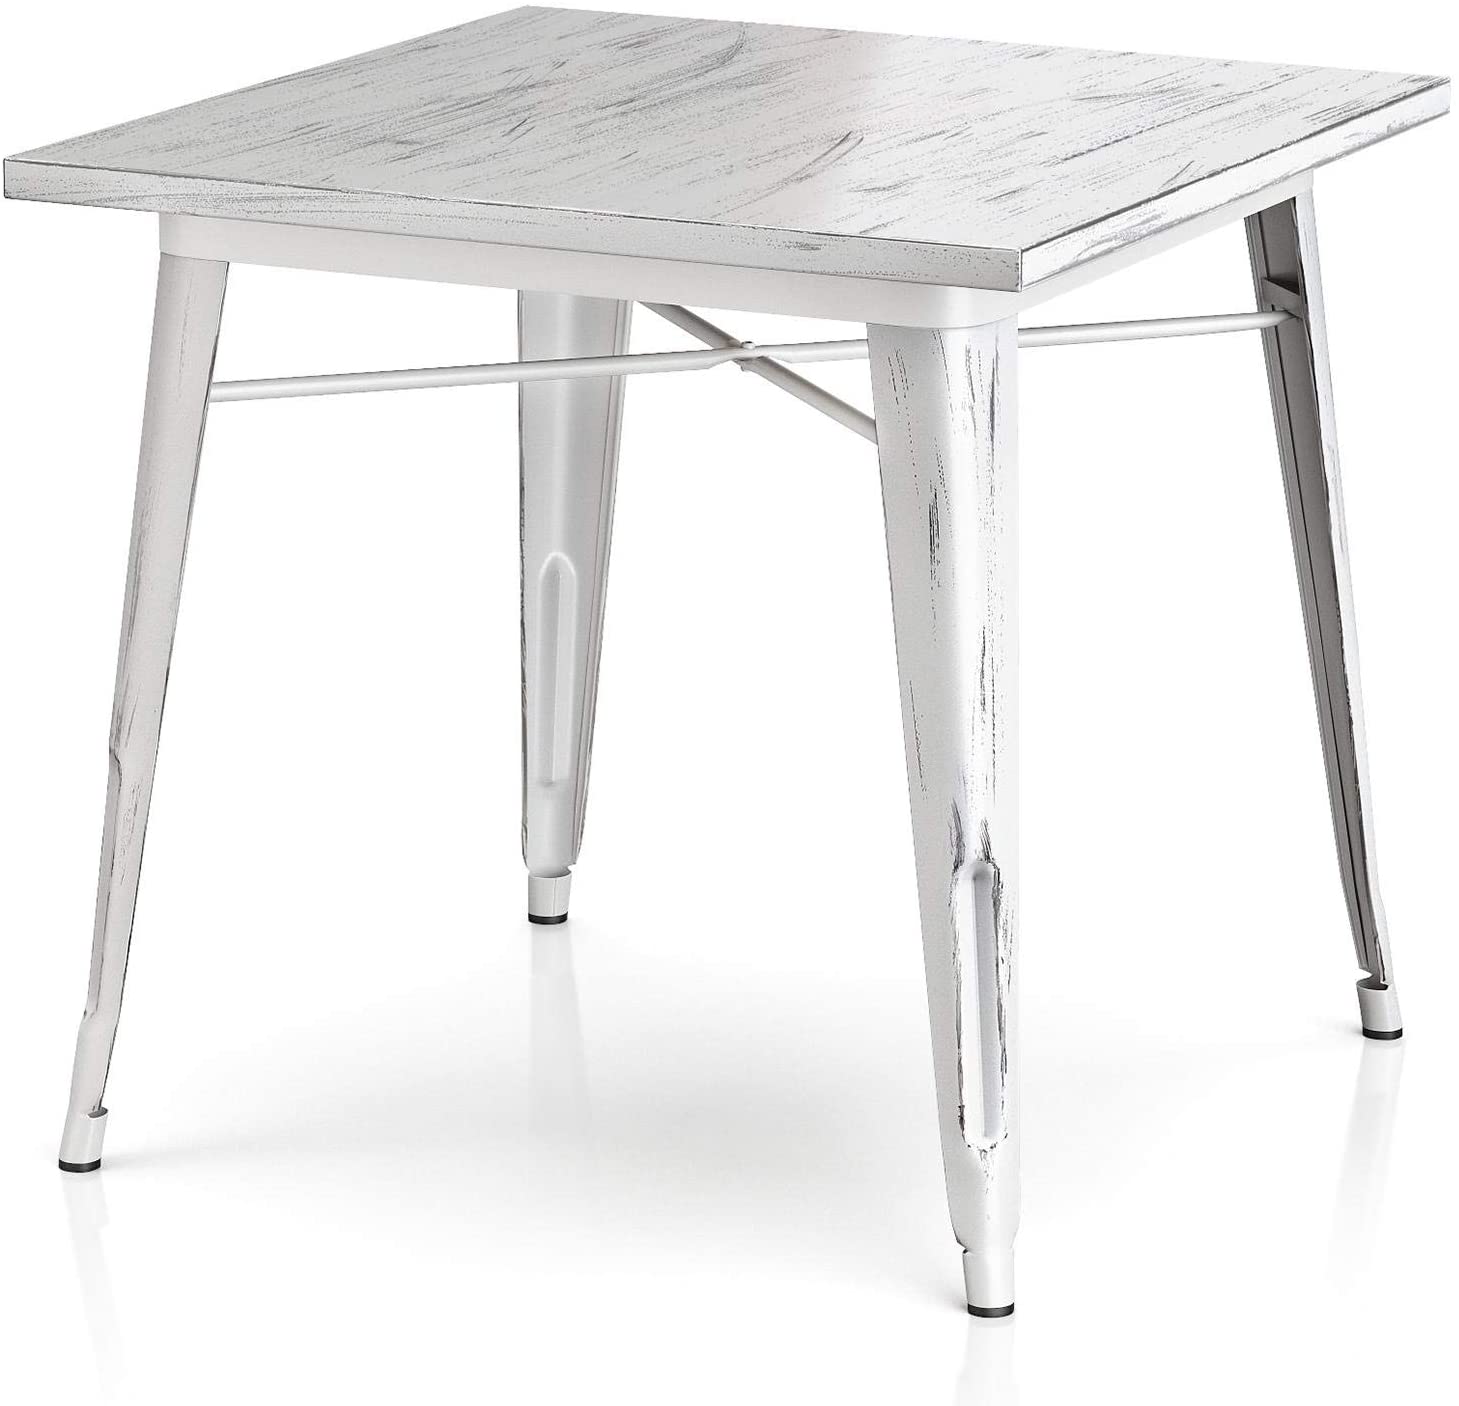 B08NTBQYM9 VIPEK 29.5 Inches Height Metal Dining Table 31.4" Square Heavy-Duty Kitchen Table for Apartment Bistro Pub Table Farmhouse Home Dining Table Rustic Trattoria Gaming Industrial Style, Distressed White